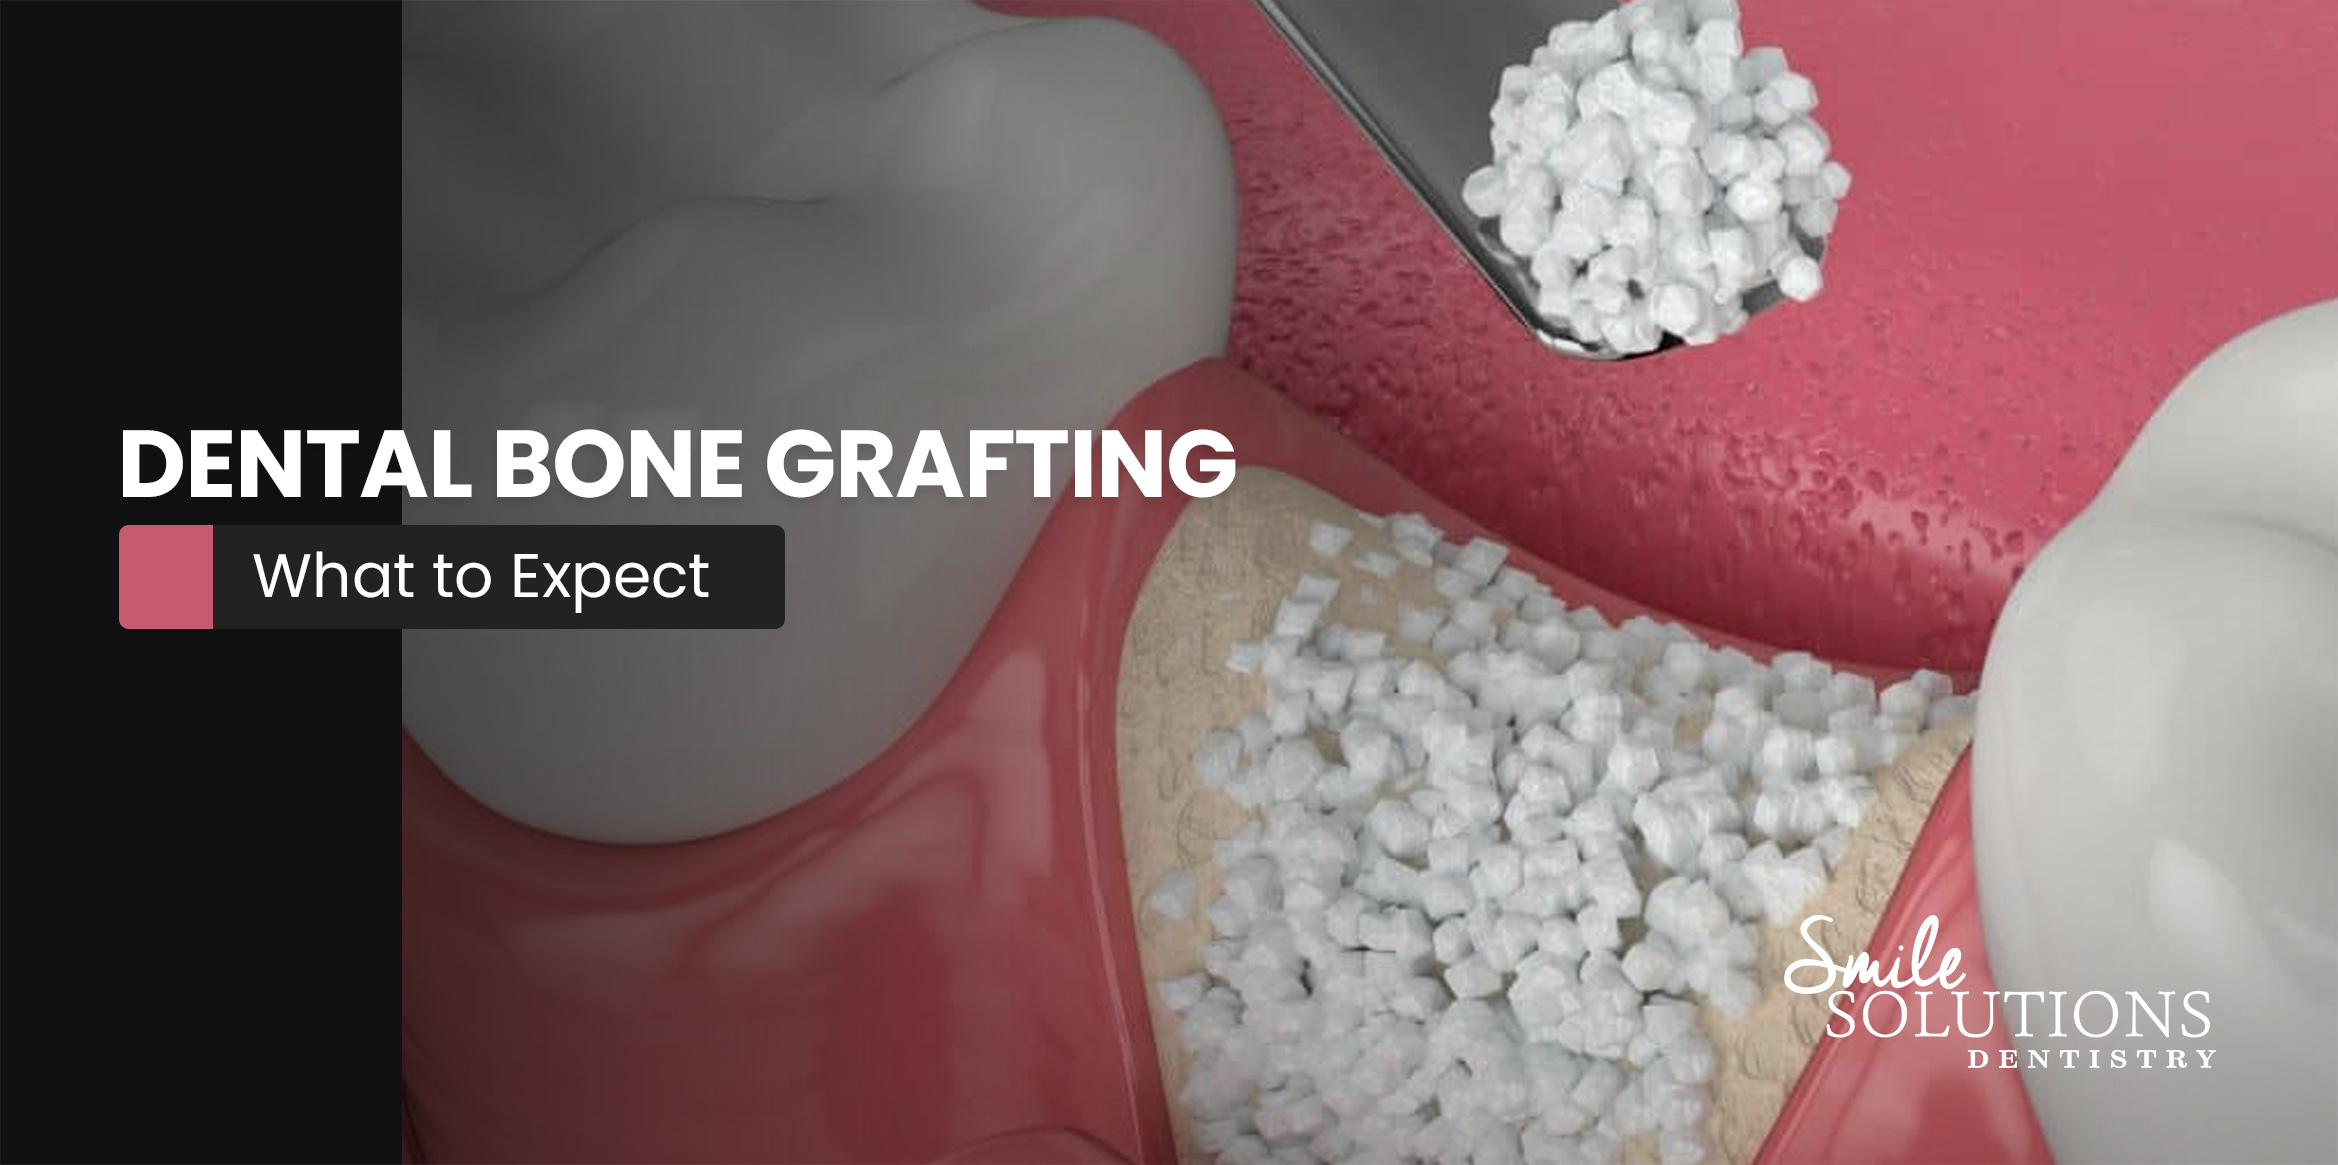 What to Expect with Dental Bone Grafting